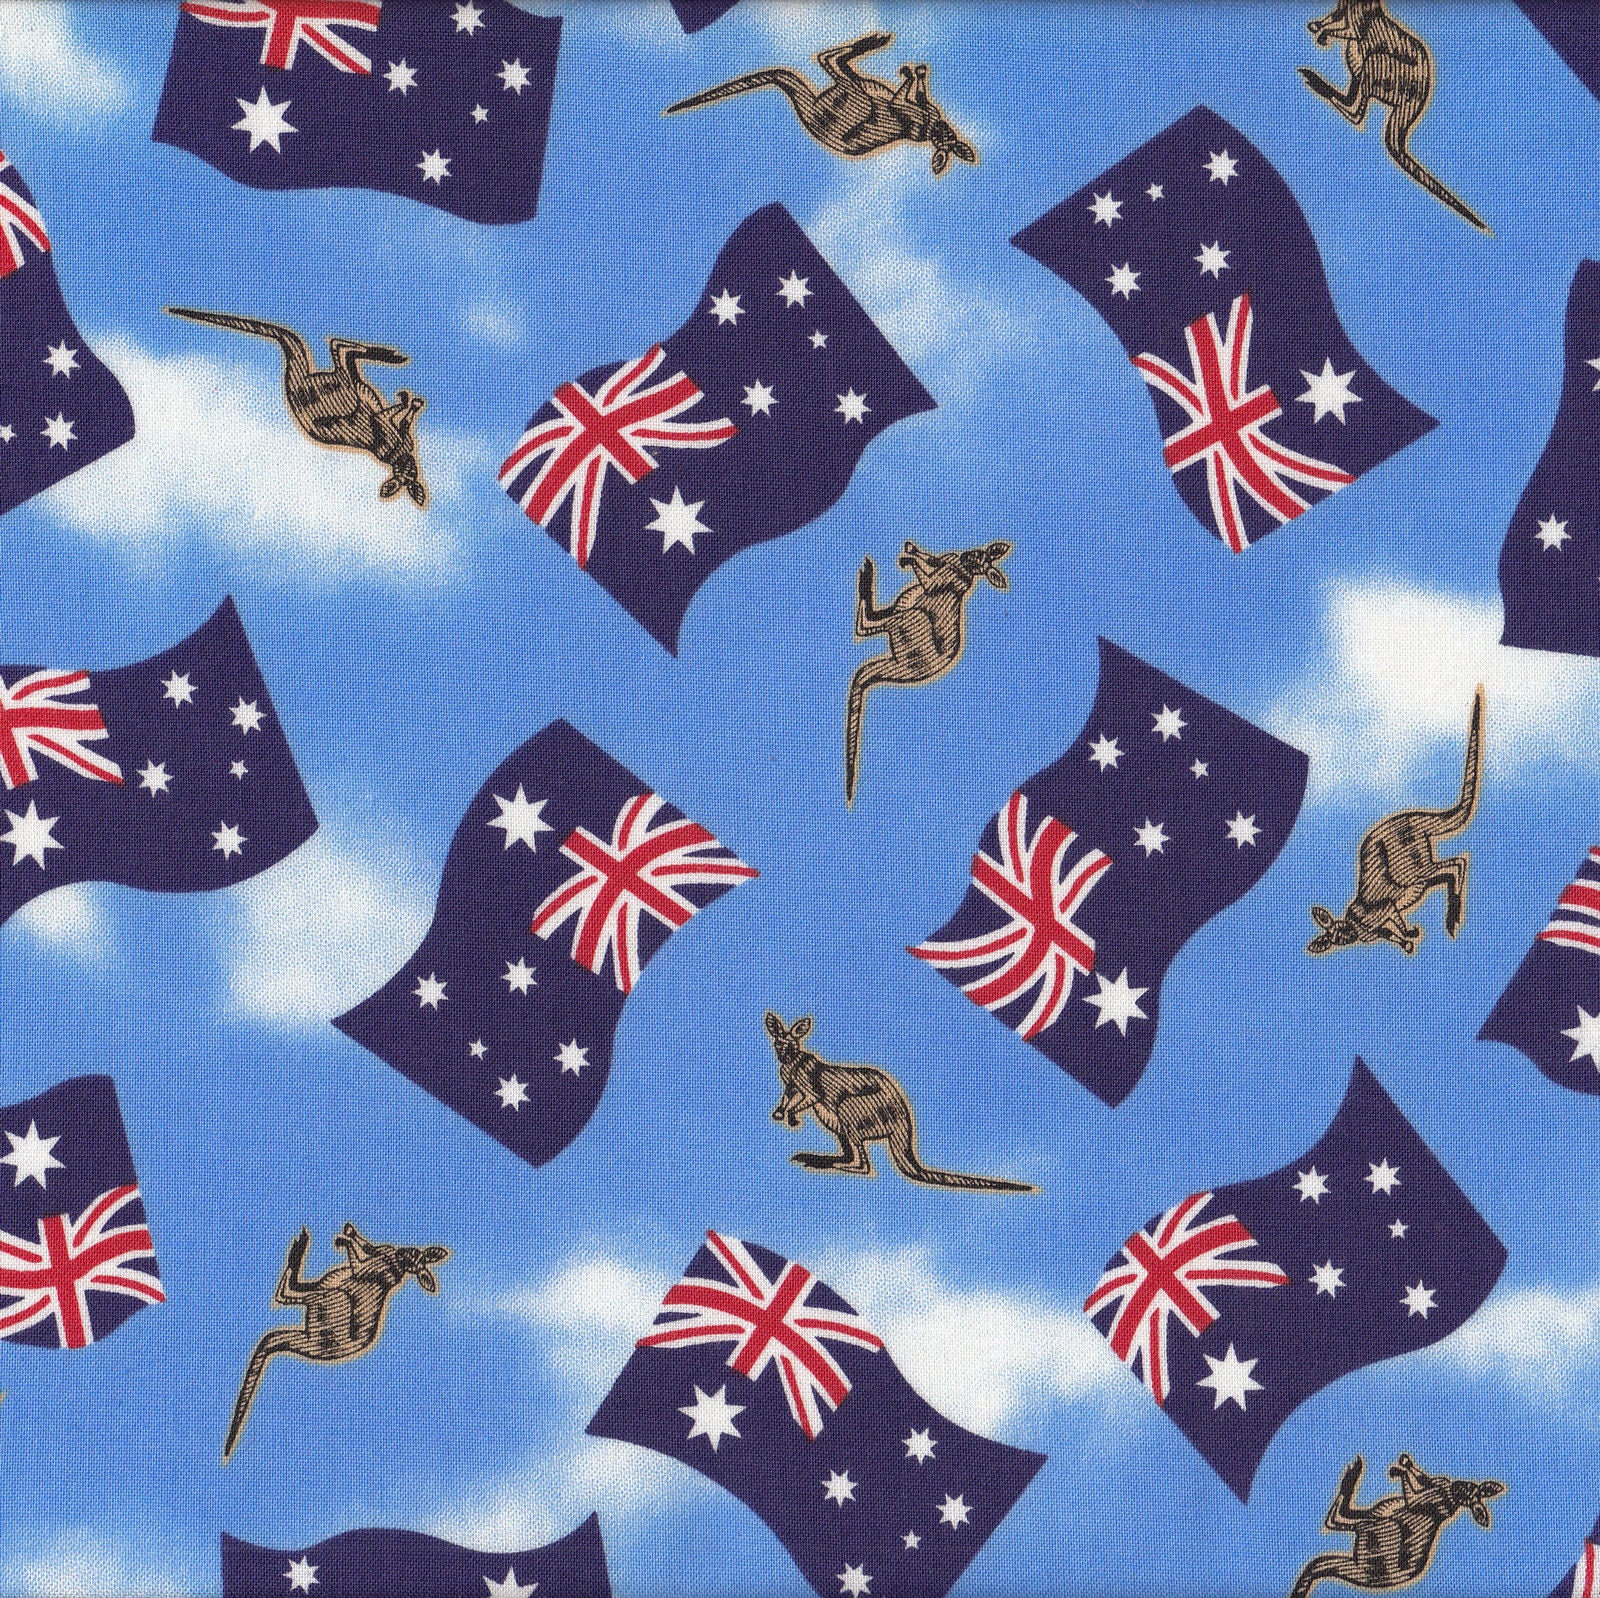 mulighed Massakre film Australian Flags and Kangaroos Tossed Blue Cotton Quilting | Etsy